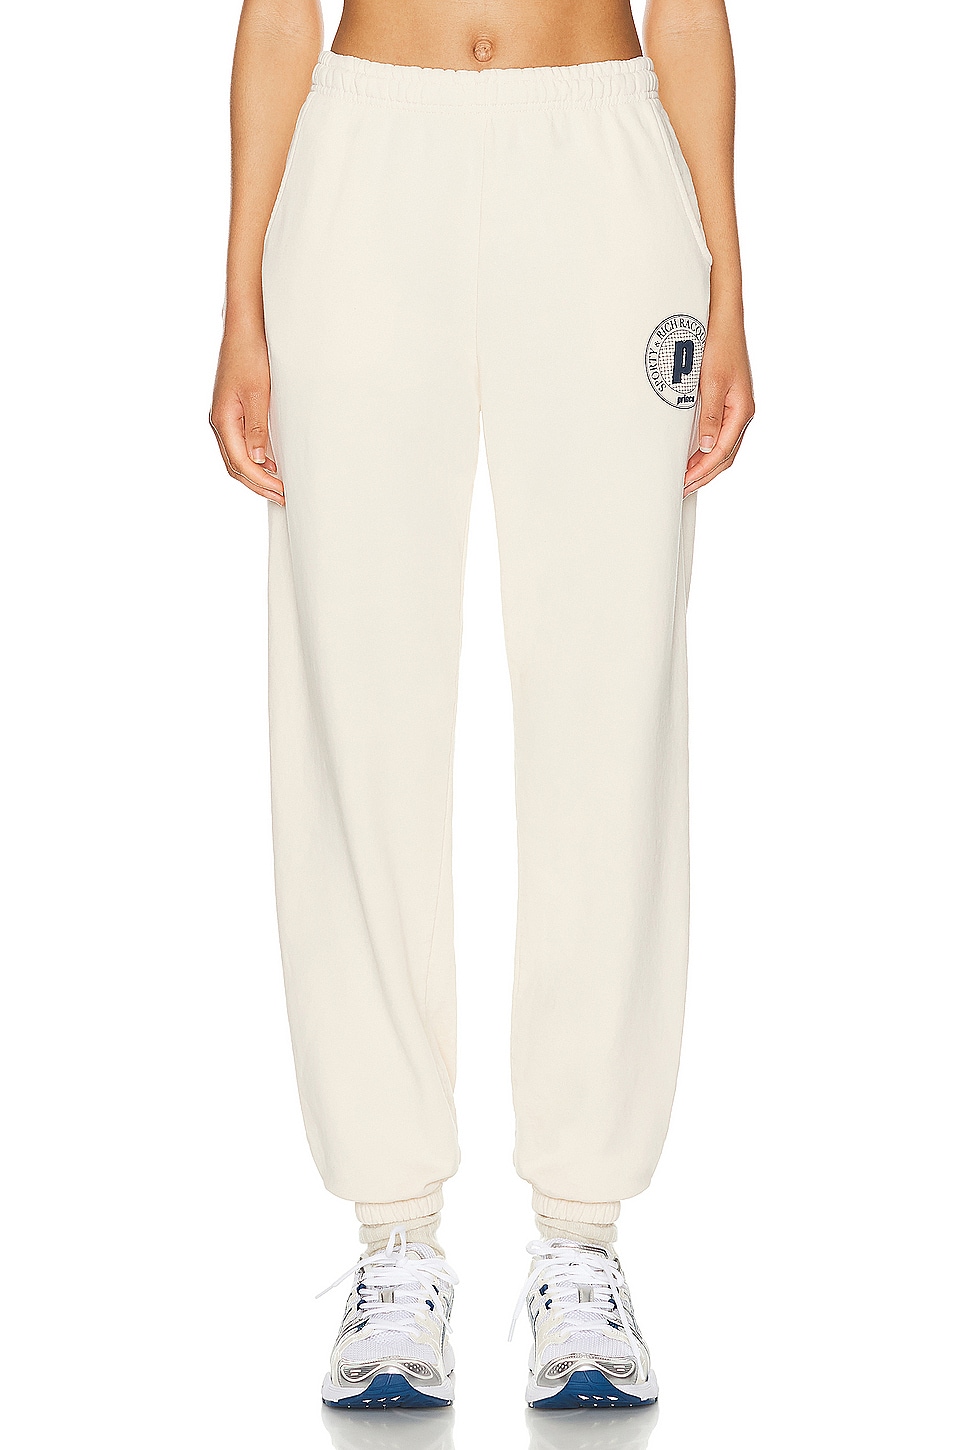 Image 1 of Sporty & Rich Net Sweatpant in Cream & Navy